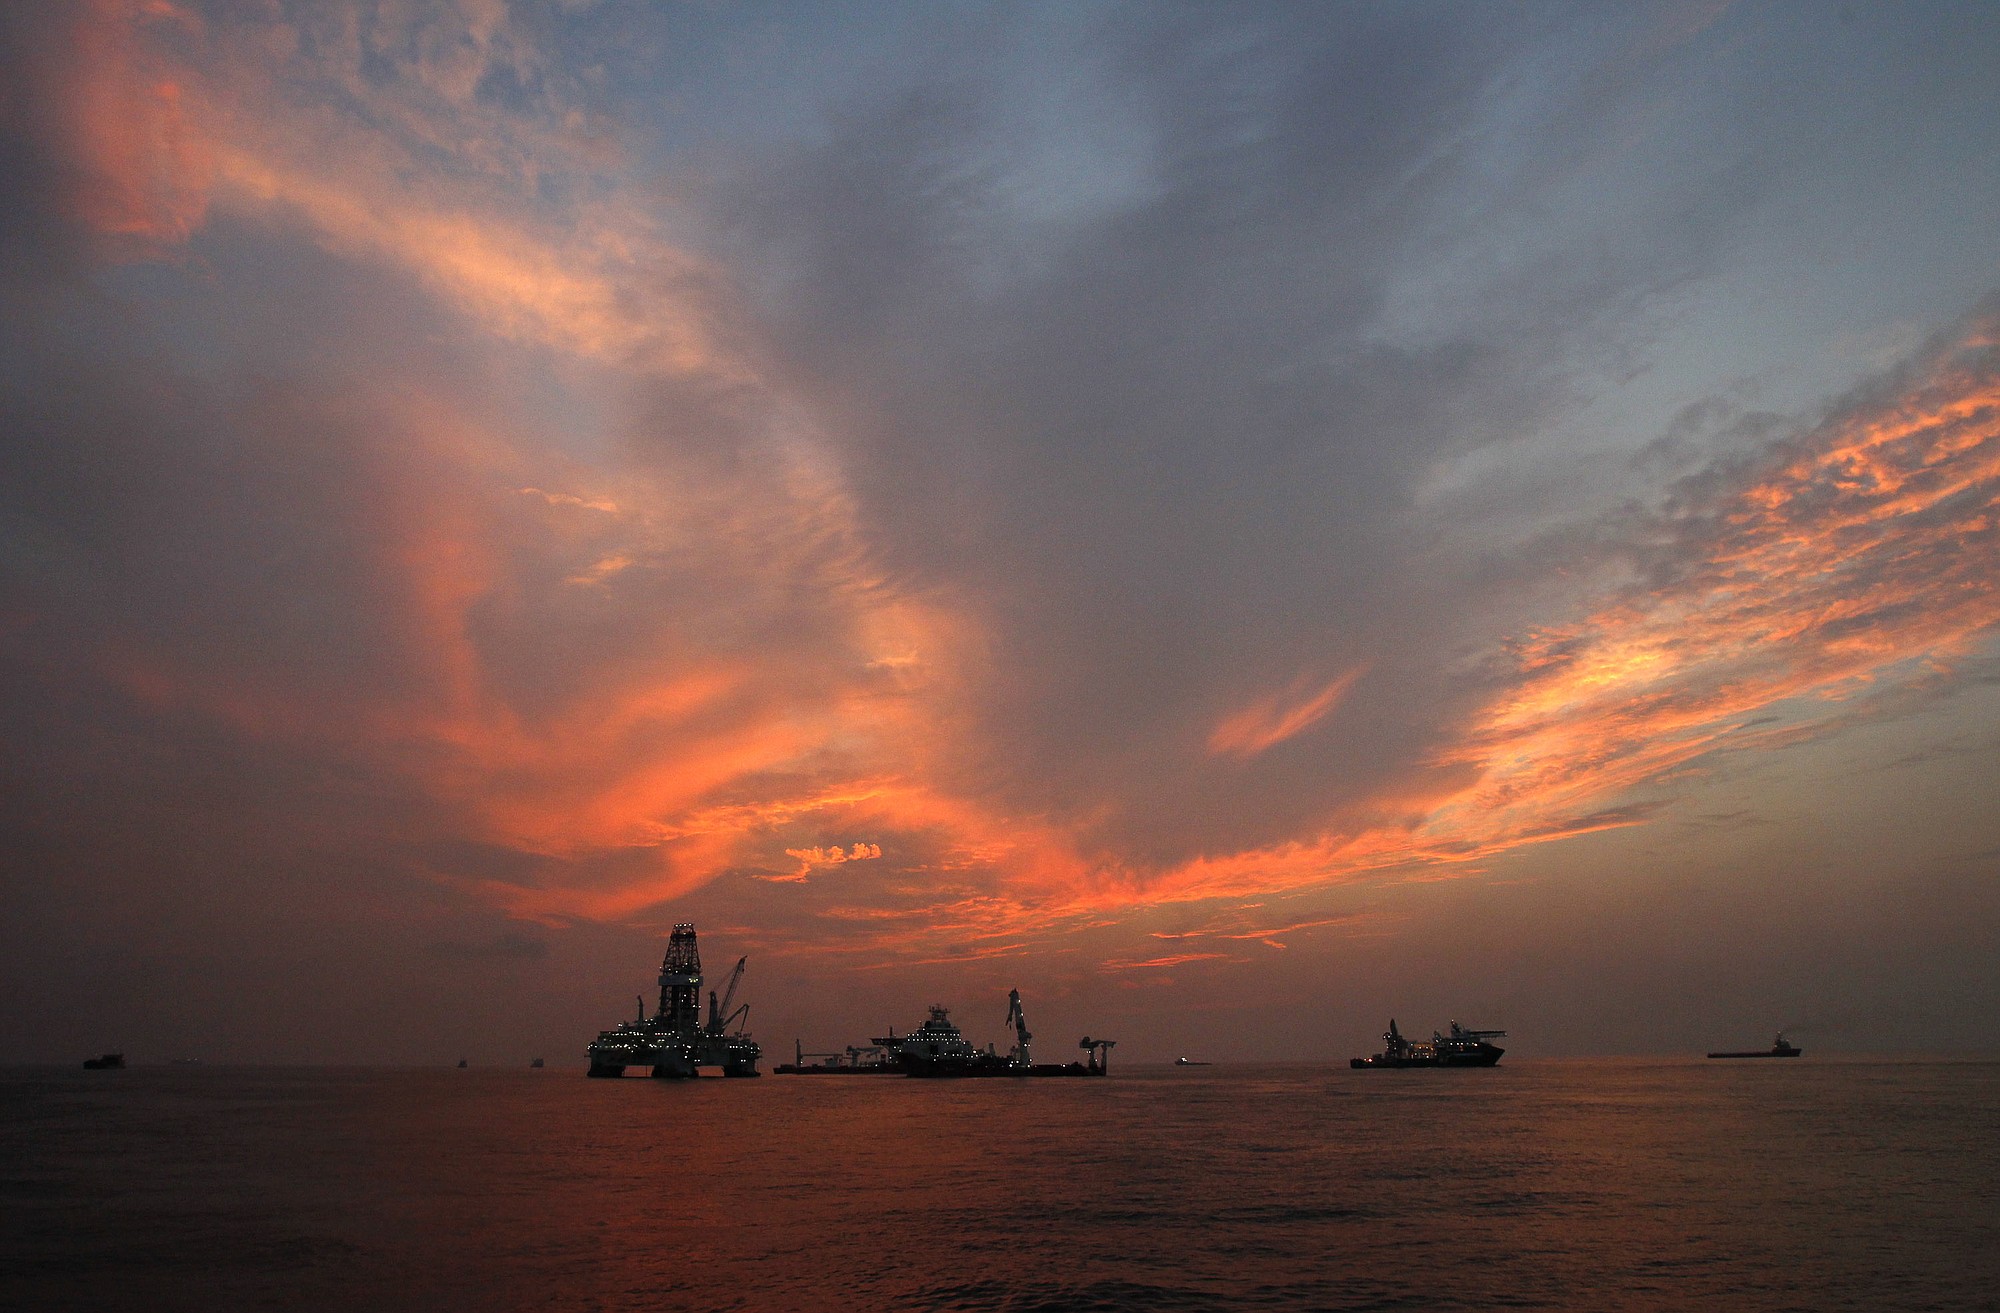 Vessels assist in the drilling of the Deepwater Horizon relief well on the Gulf of Mexico near the coast of Louisiana at sunset on Sept.